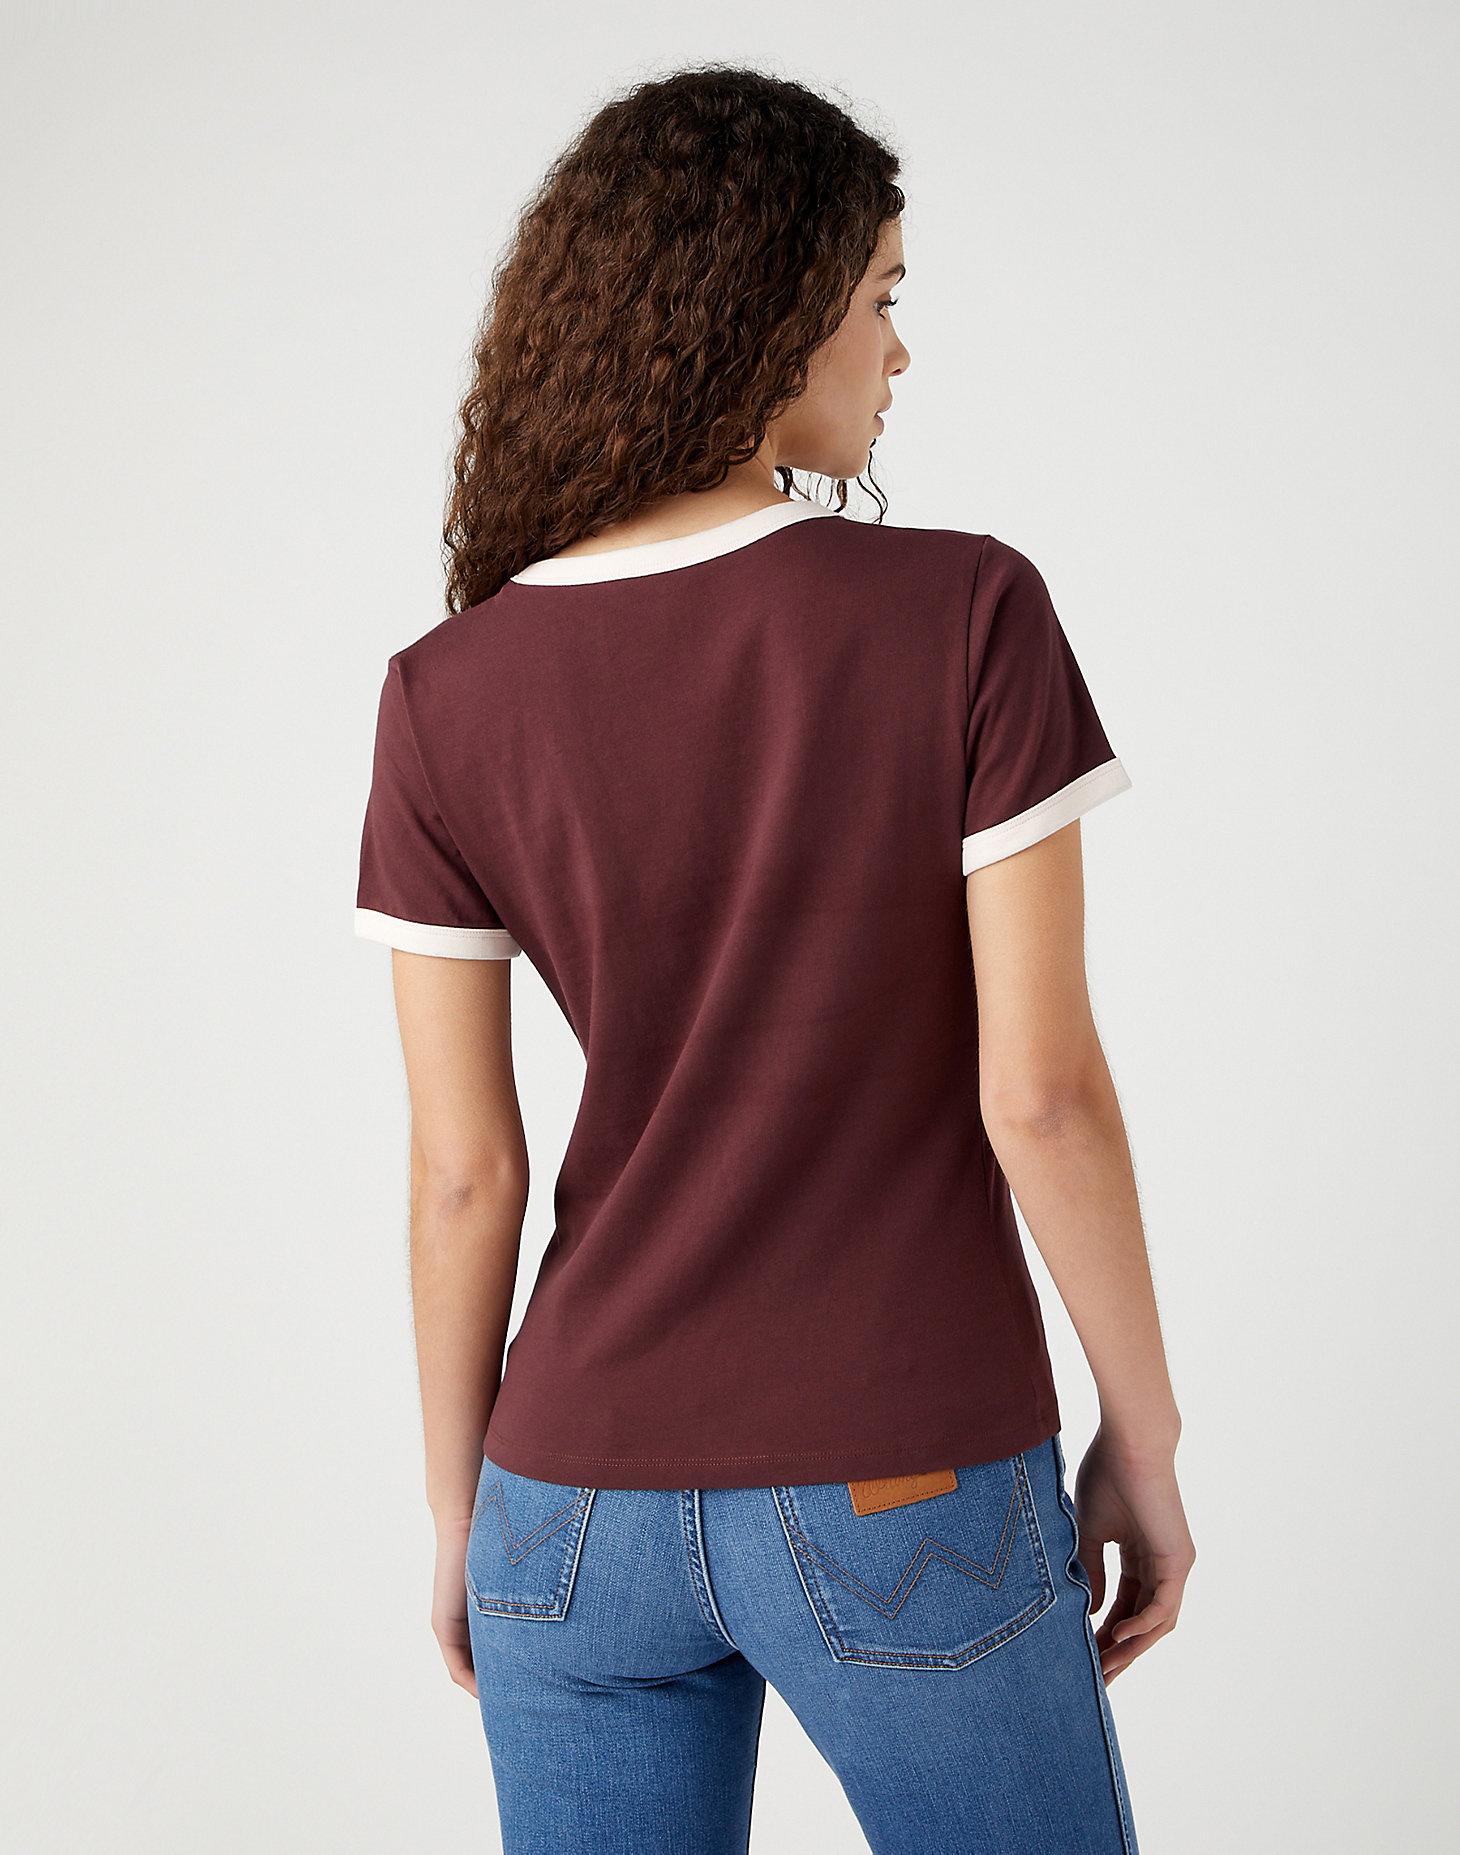 Relaxed Ringer Tee in Dahlia alternative view 2